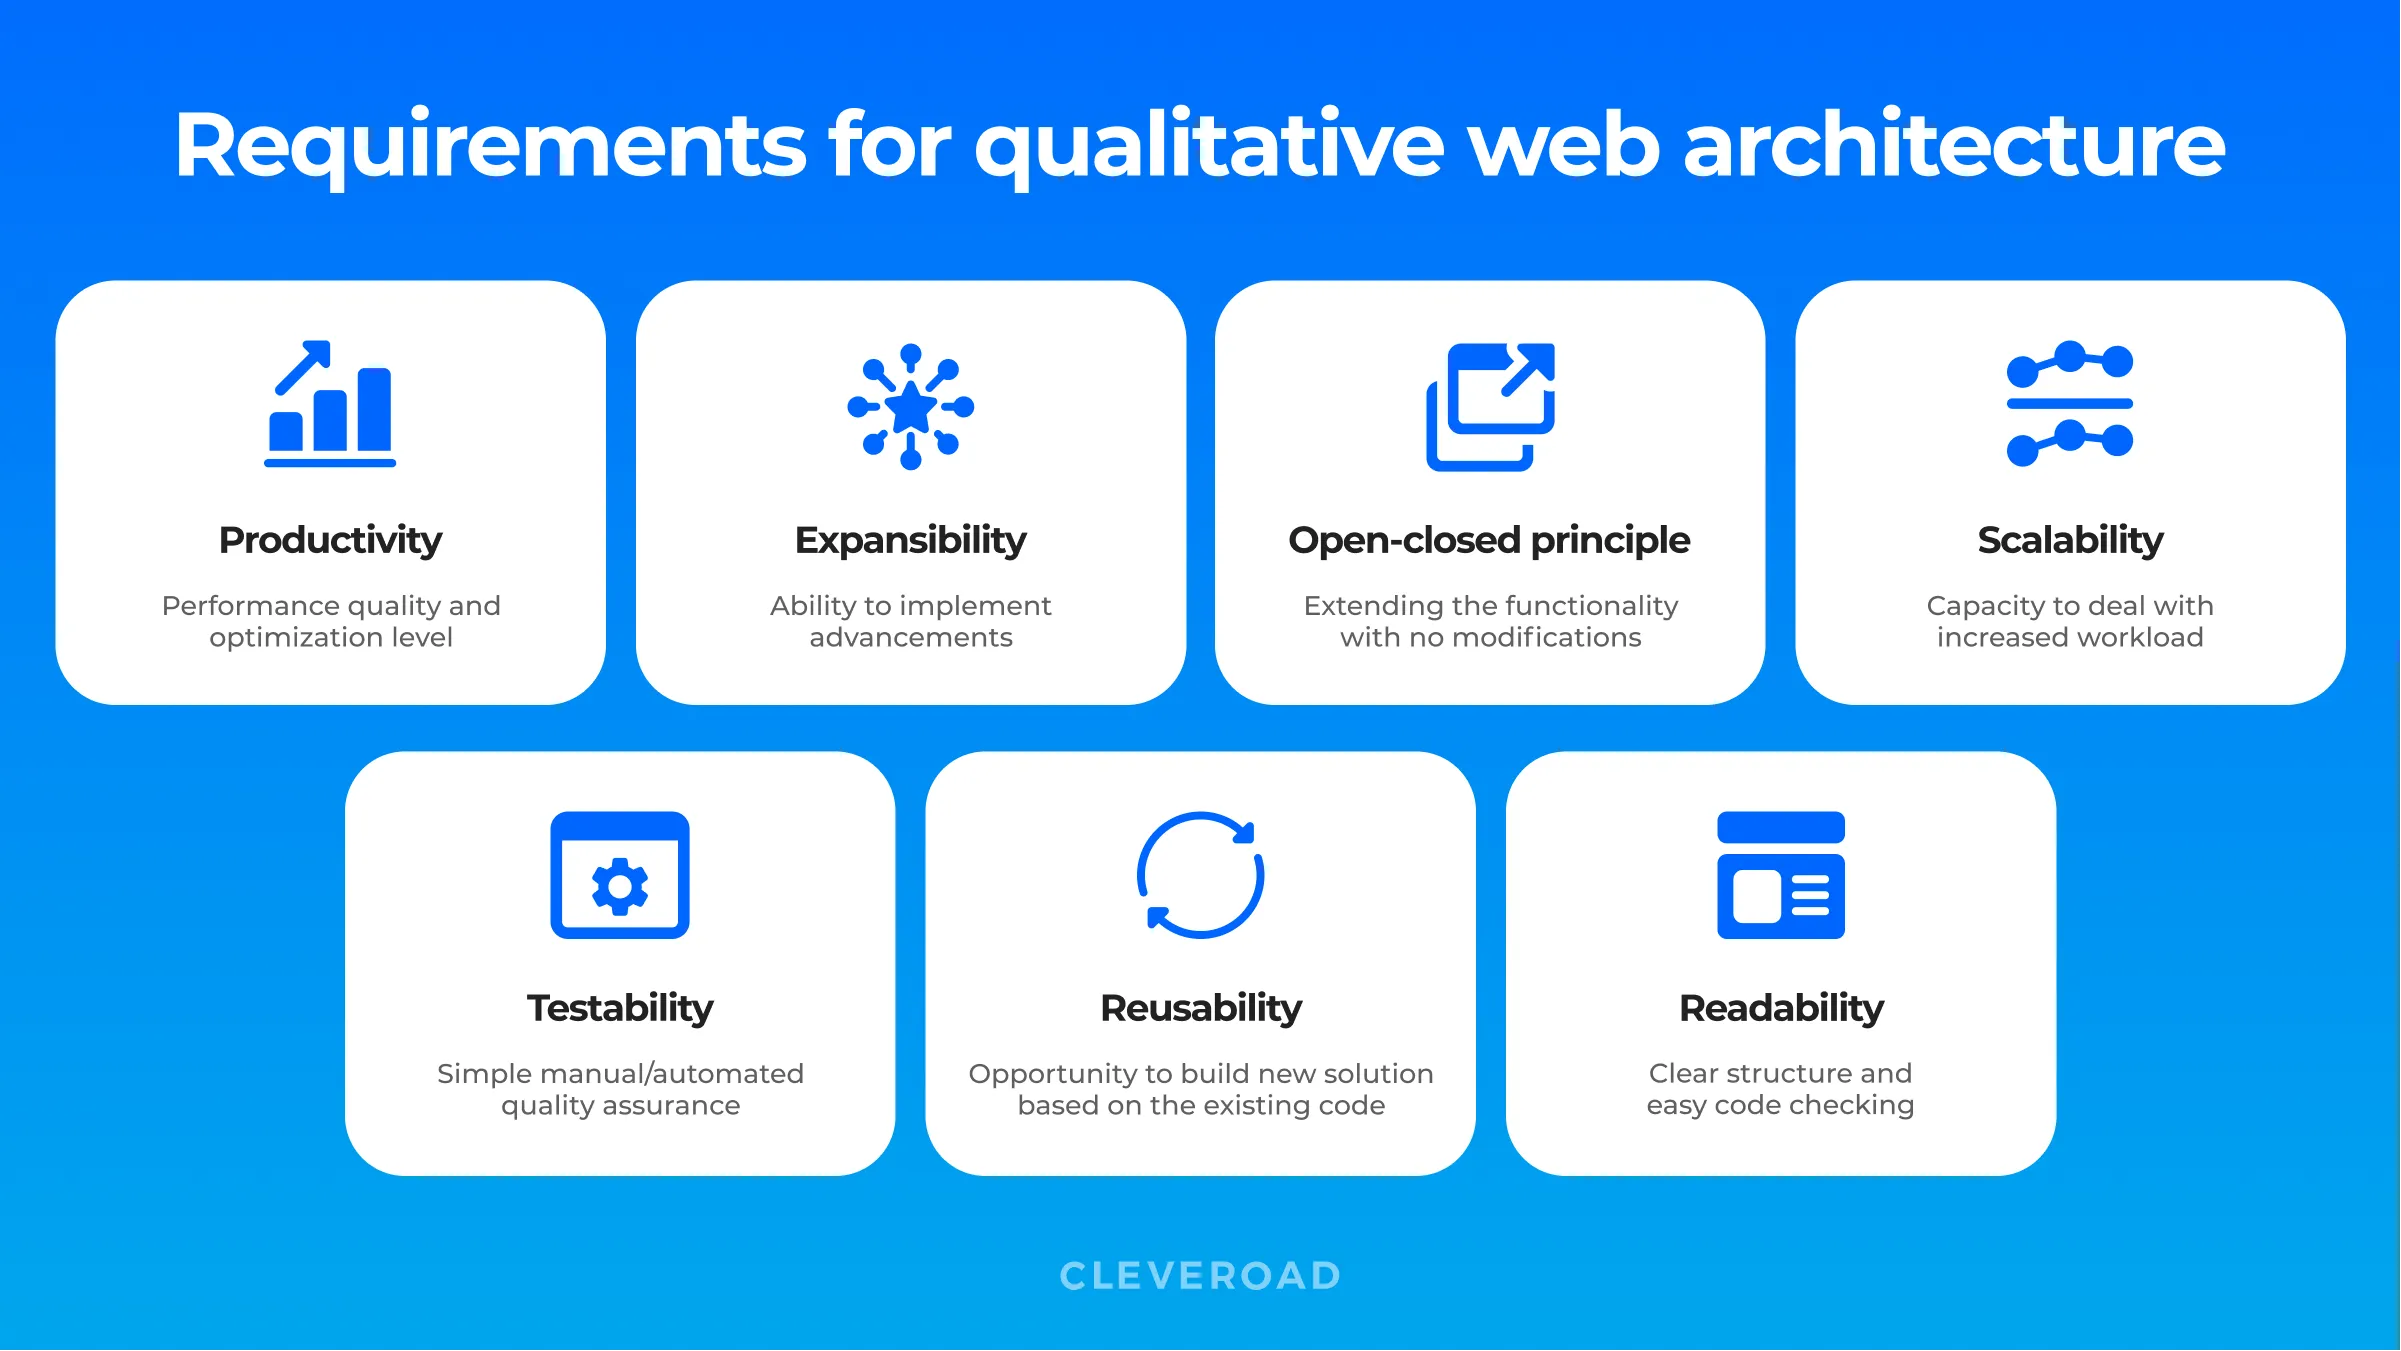 Requirements for web architecture